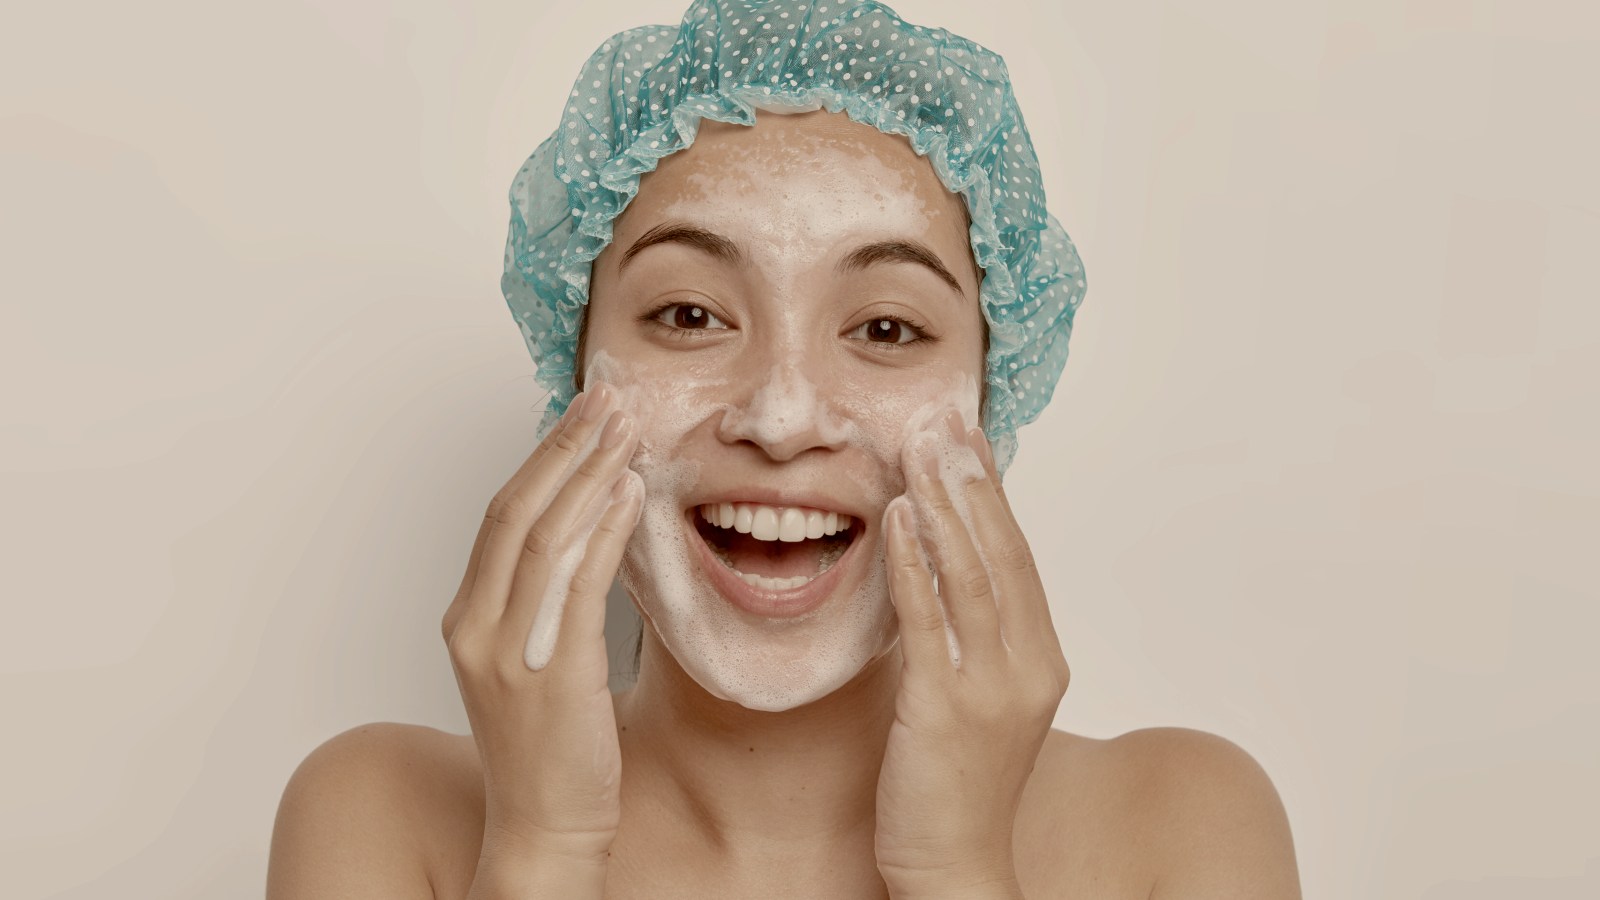 5 best face washes for combination skin that actually work